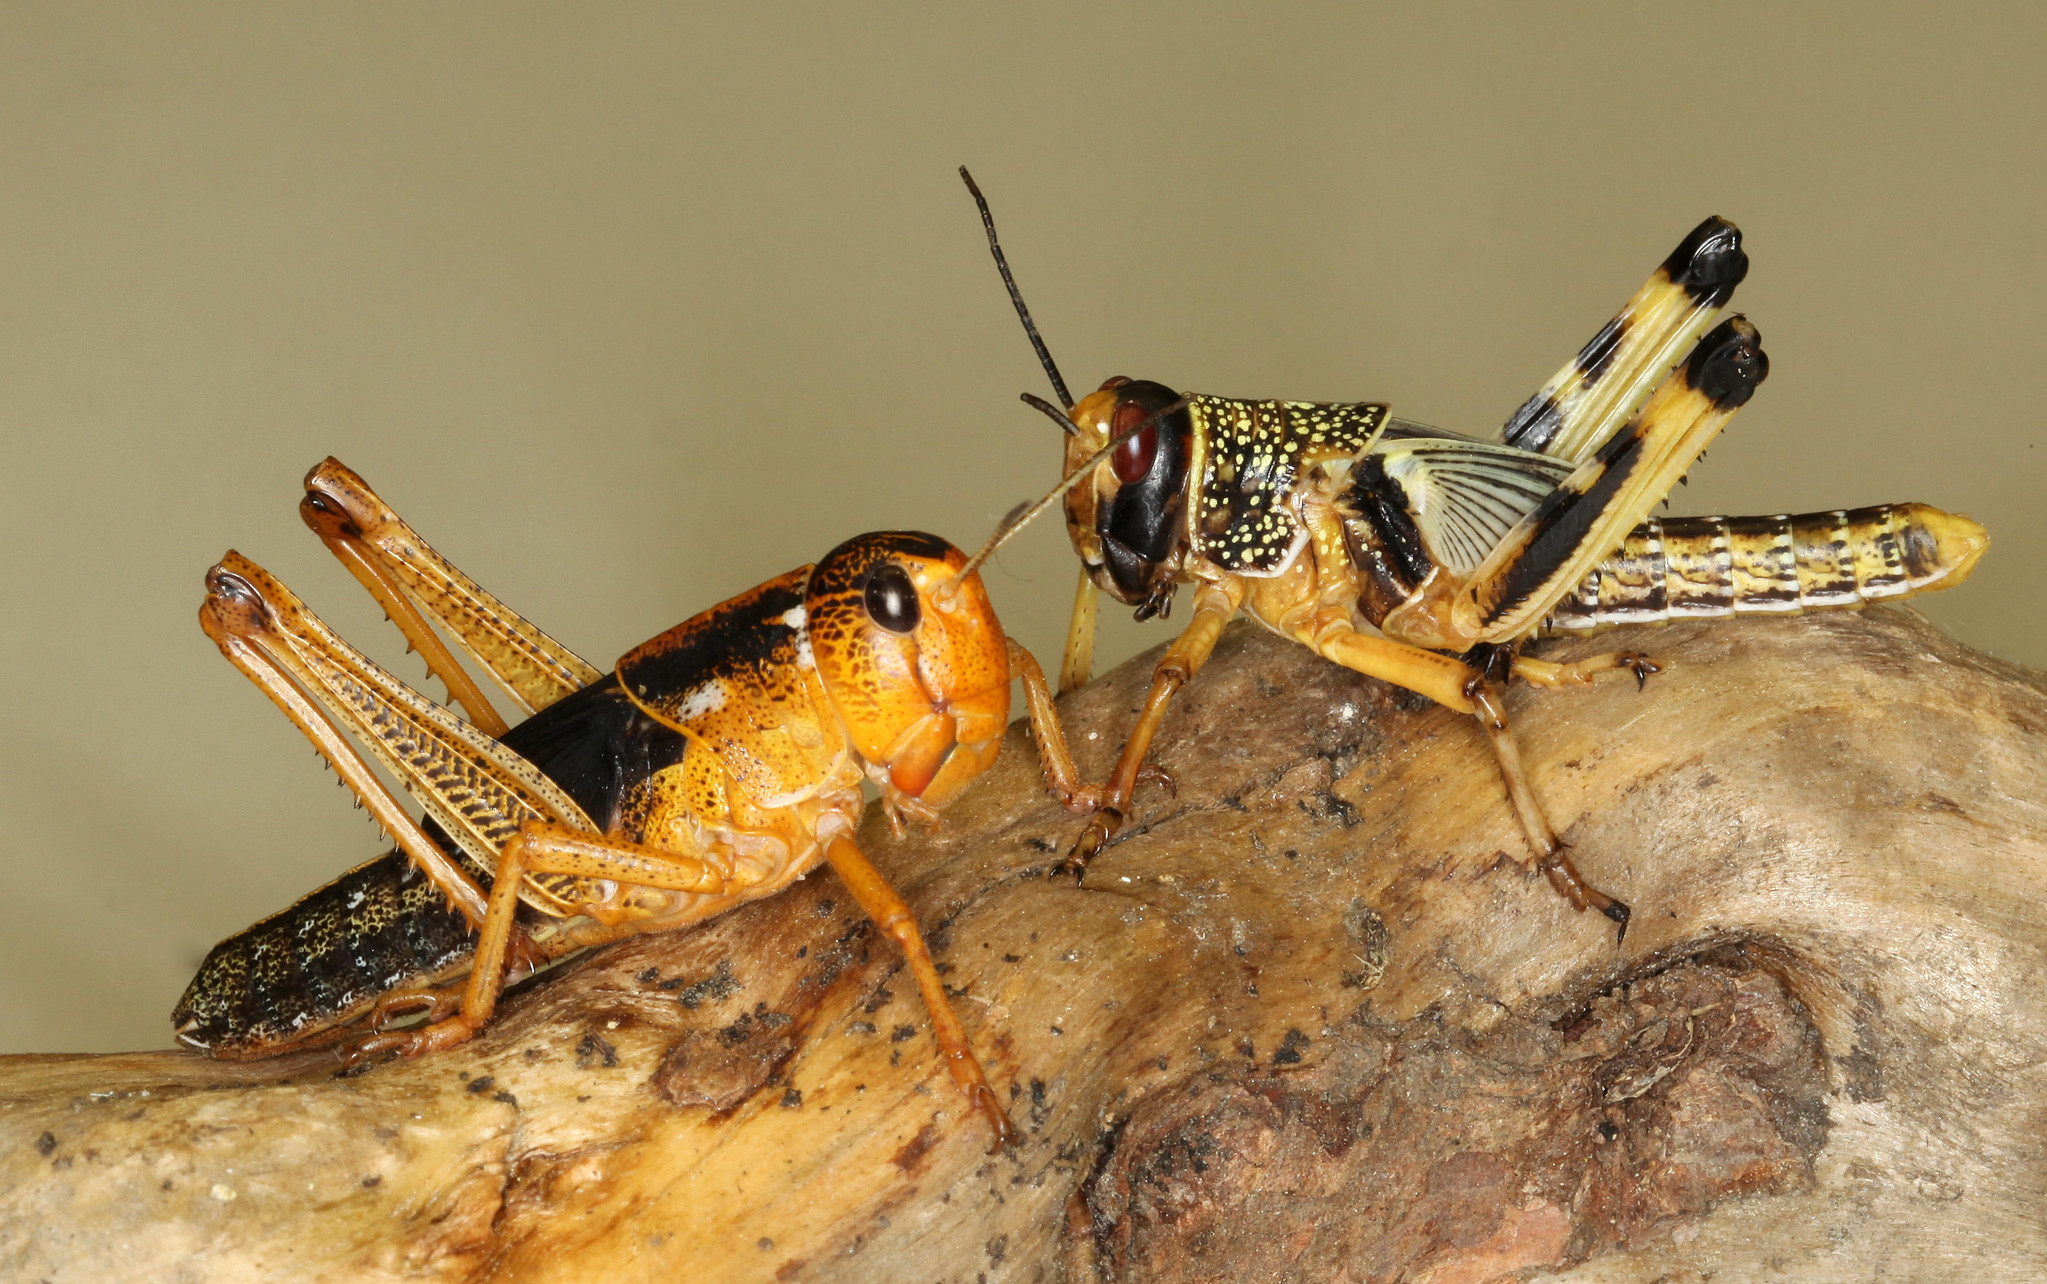 locusts are swarming grasshoppers that attack crops damaging them